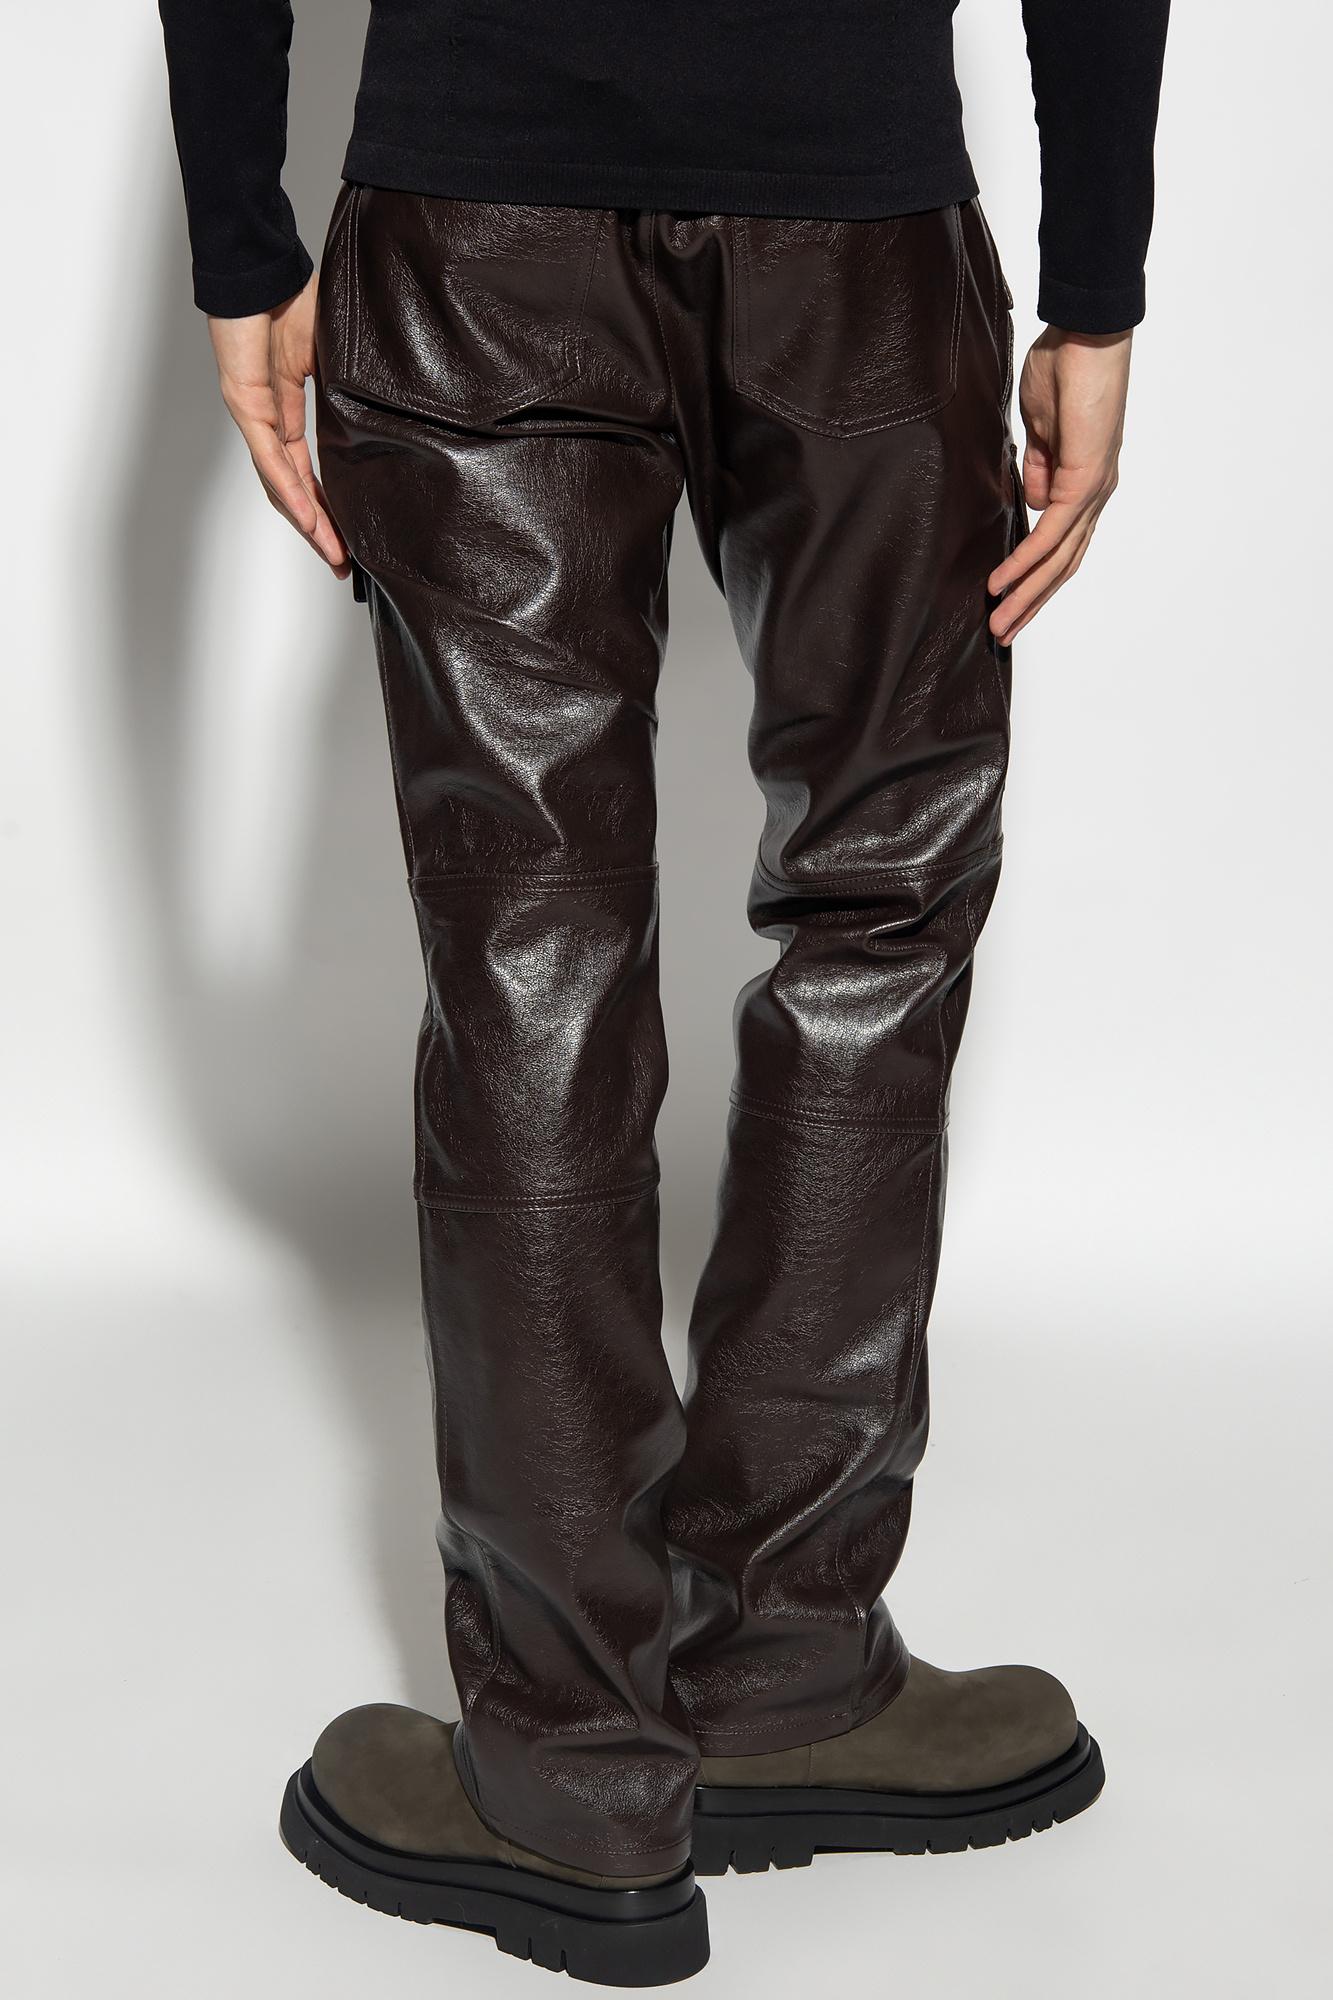 HIDEOUT WESTERN CRUISER JEANS - Hideout Leather